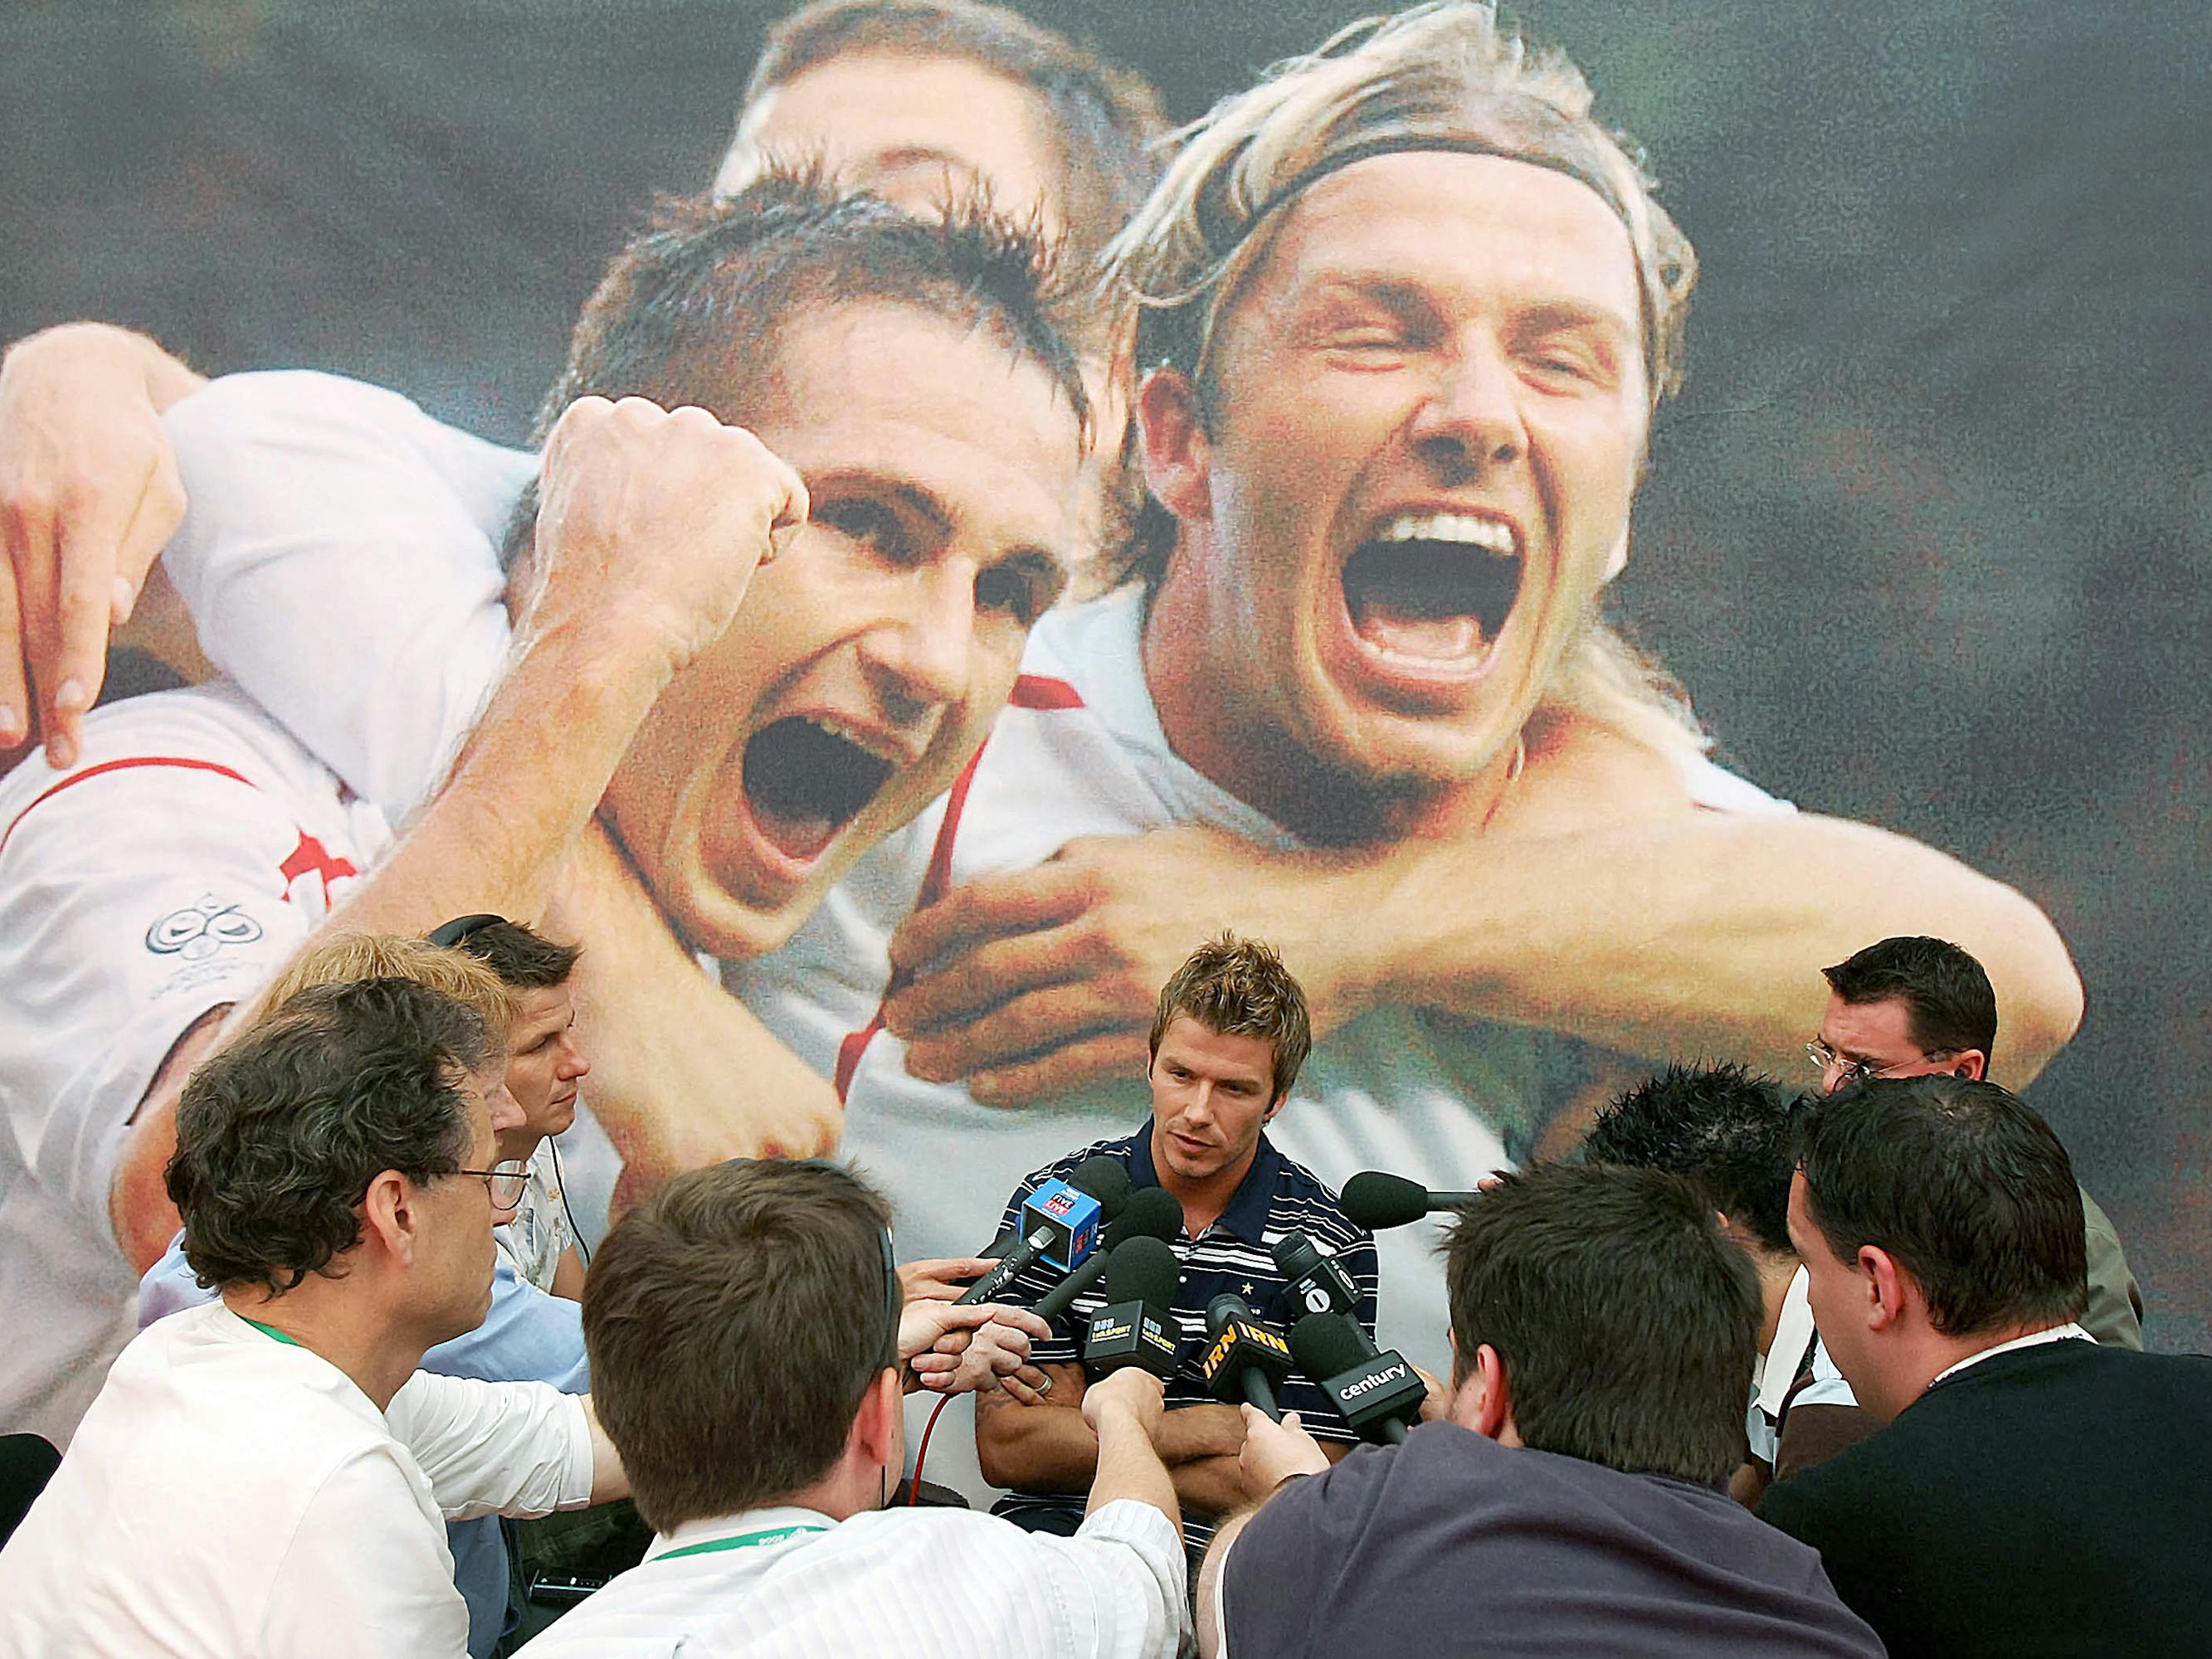 David Beckham gives a press conference to a swarm of reporters, against a backdrop with his and his teammates’ excited faces.